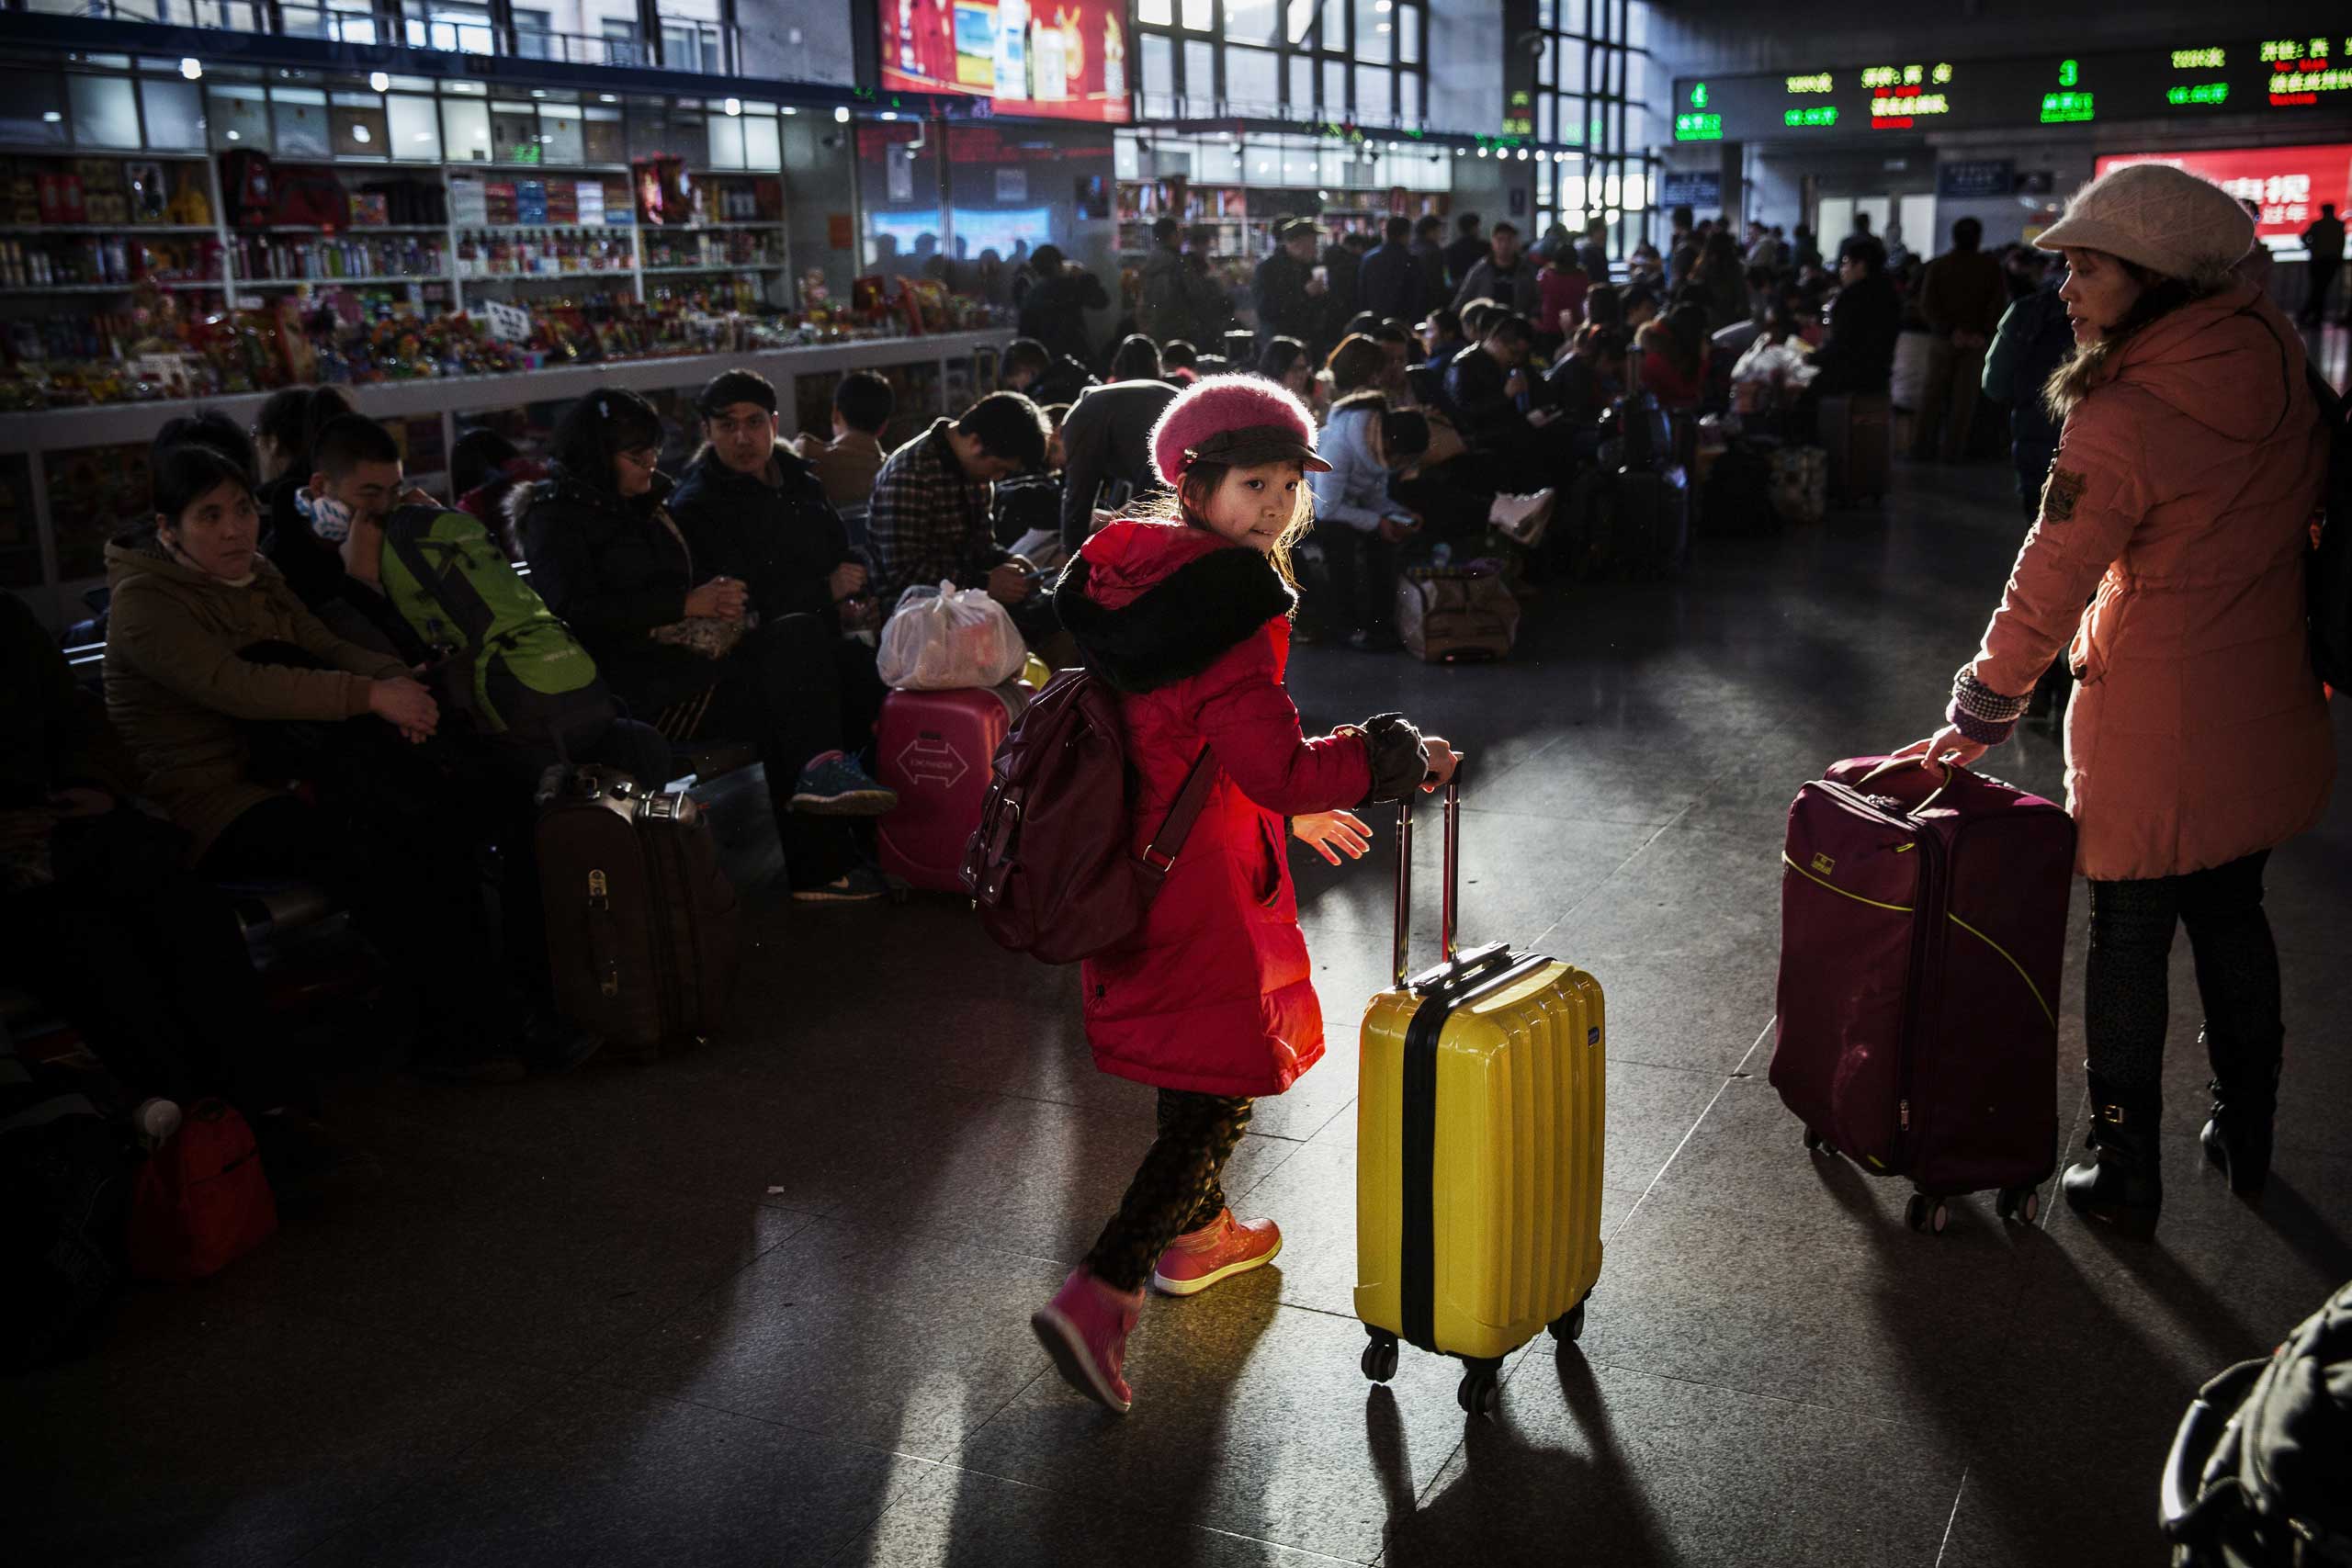 A young traveler wheels her bag as others wait in the departure area for a train at a local railway station on Feb. 16, 2015 in Beijing.